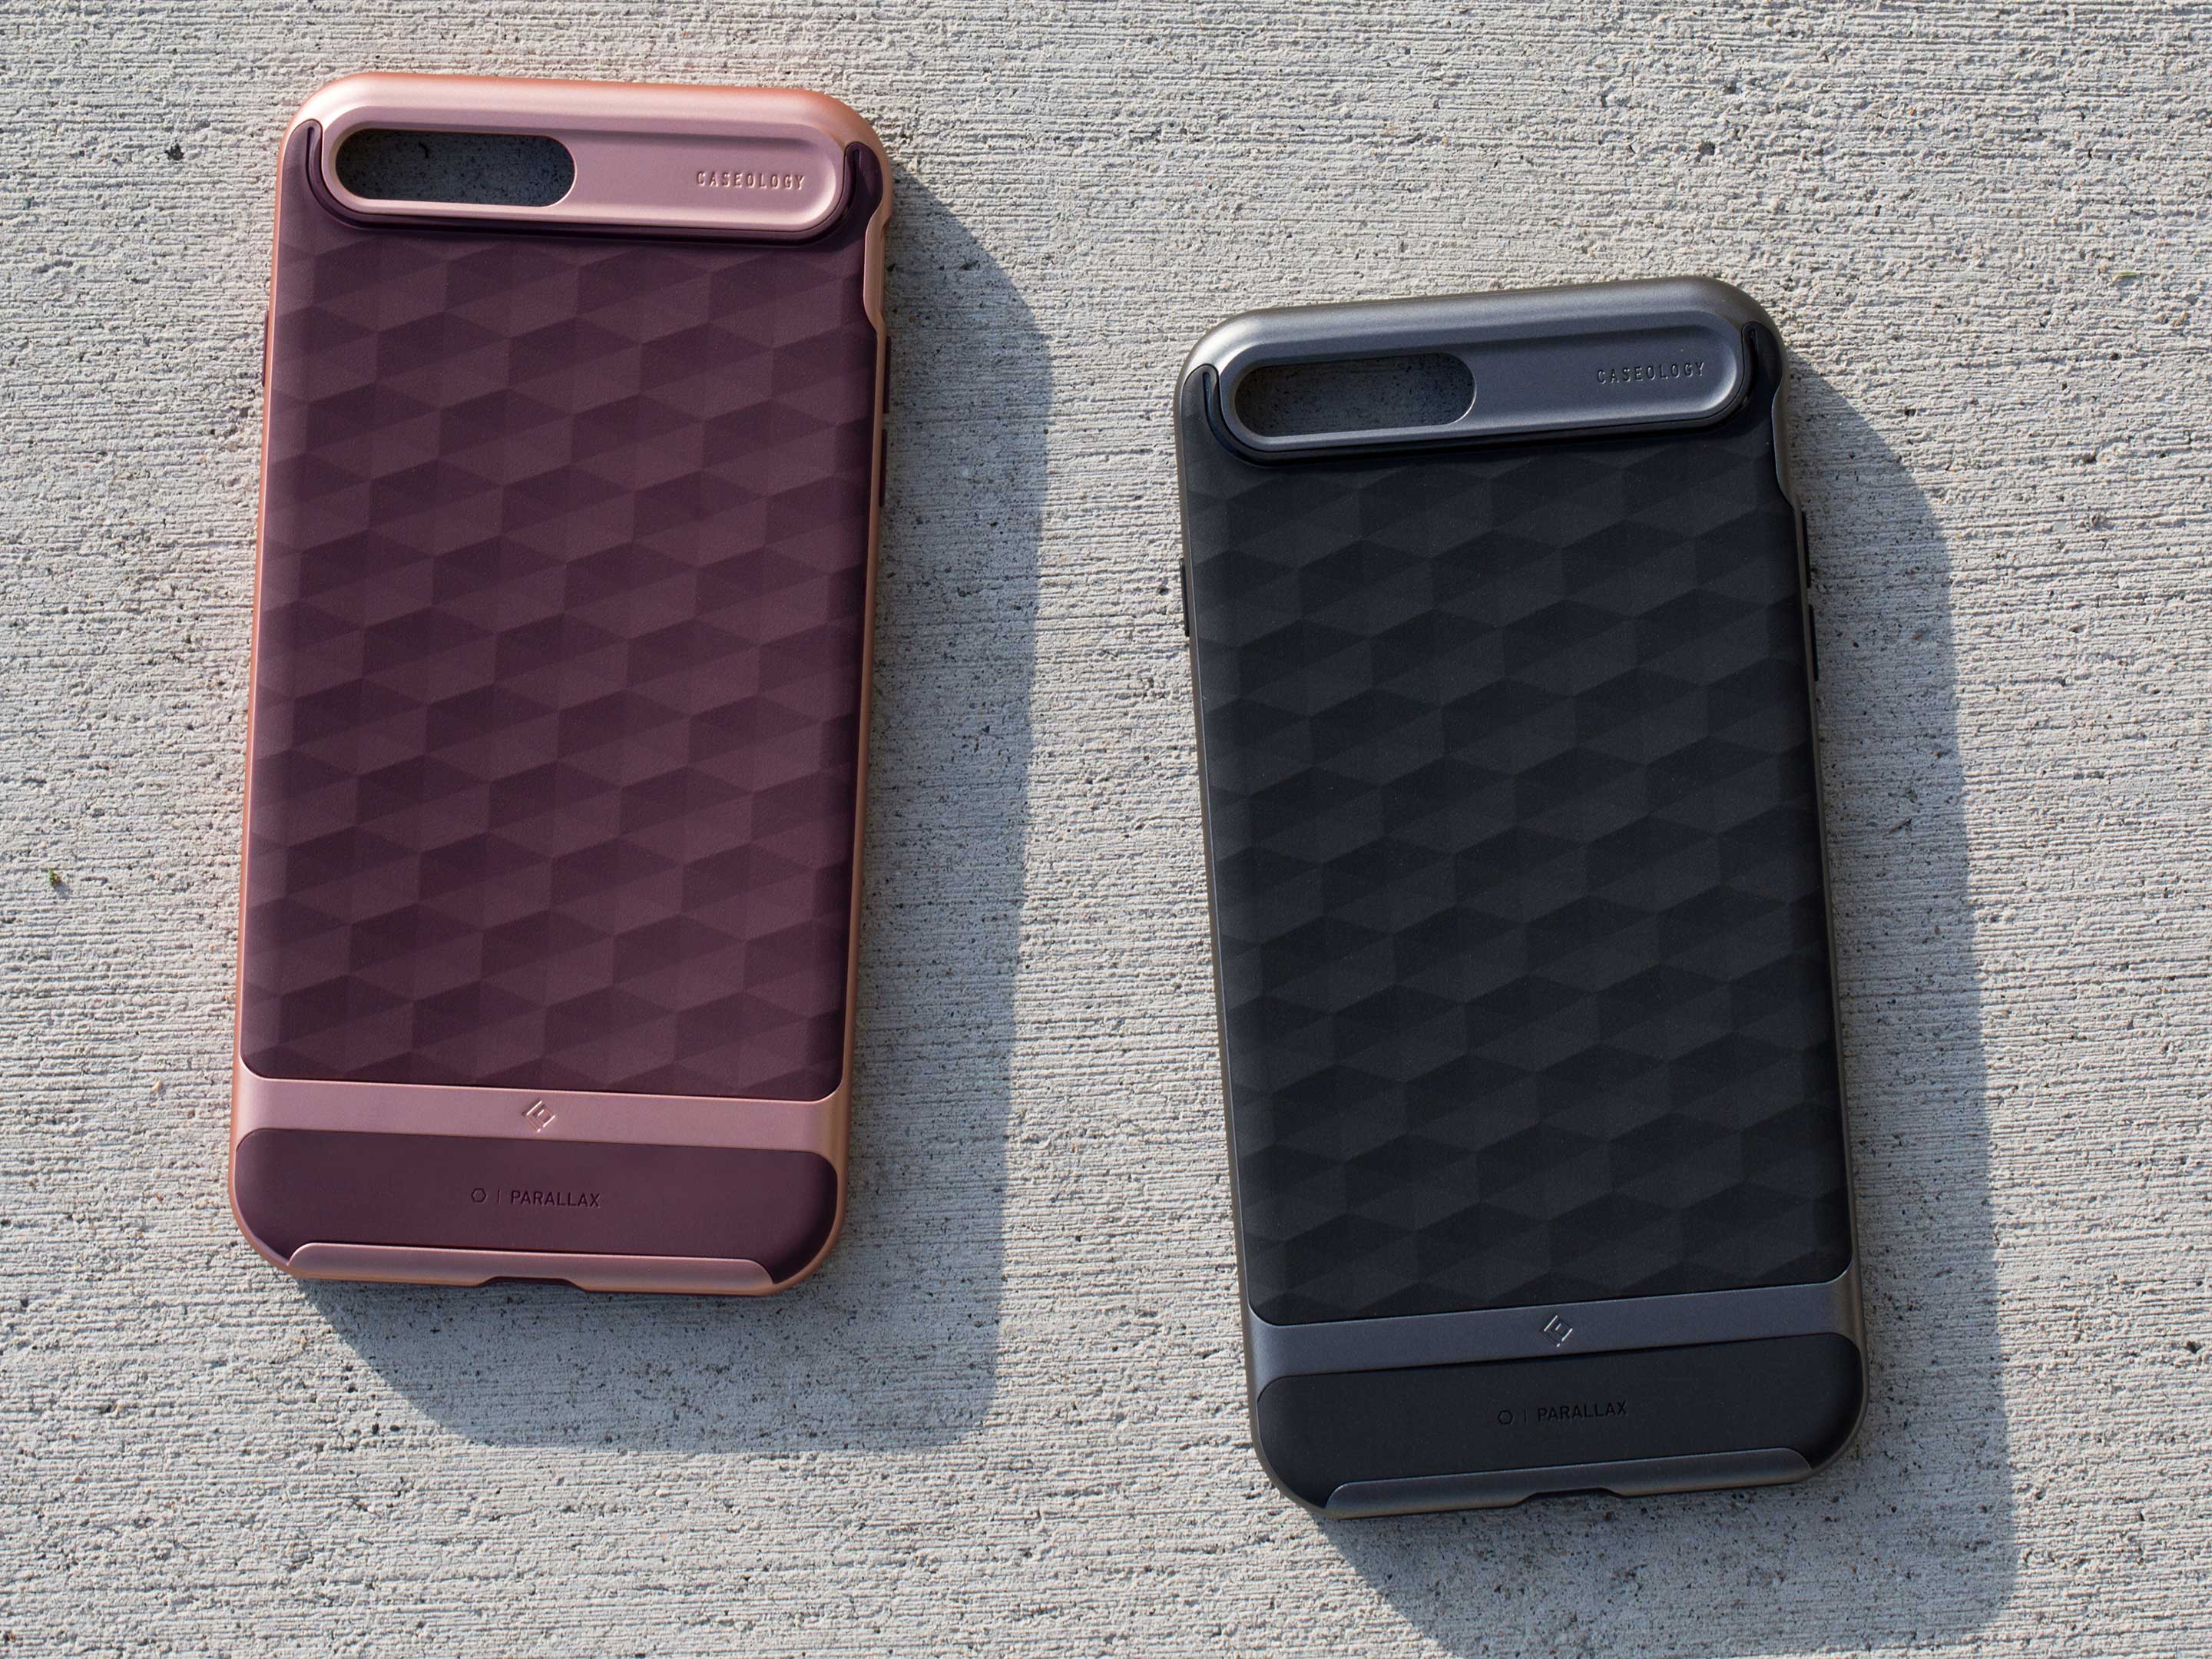 Here are Caseology's iPhone 8, iPhone 8 Plus and iPhone X cases